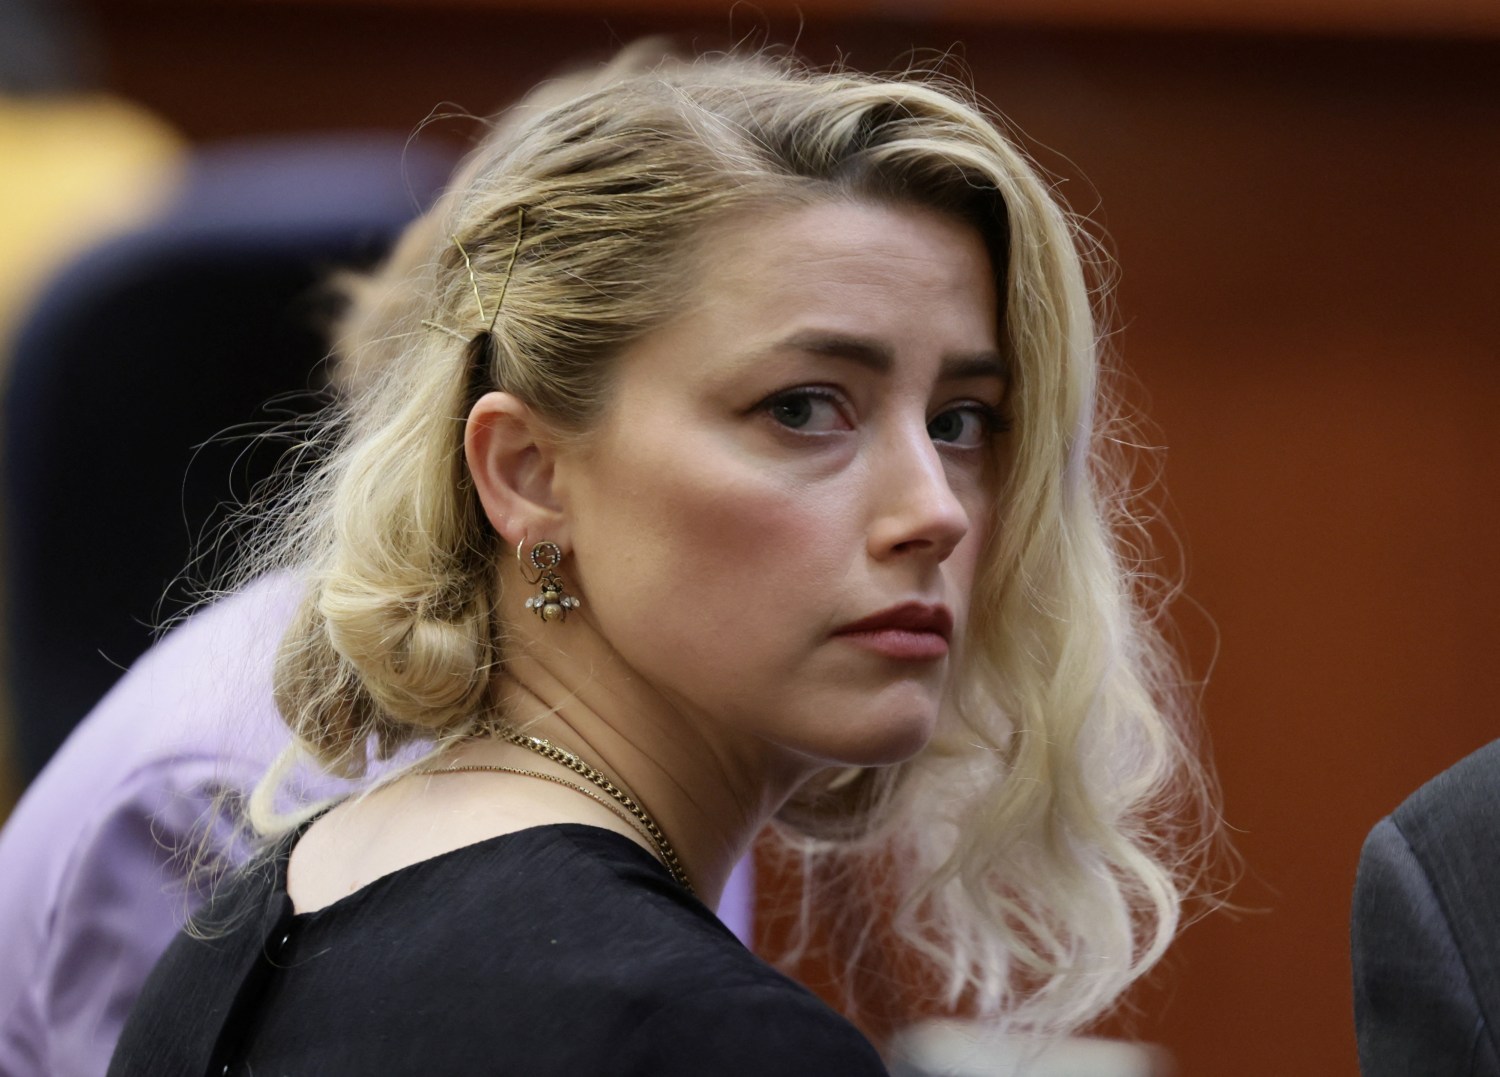 Amber Heard's Lawyer Elaine Bredehoft Steps Down From Representing Actor